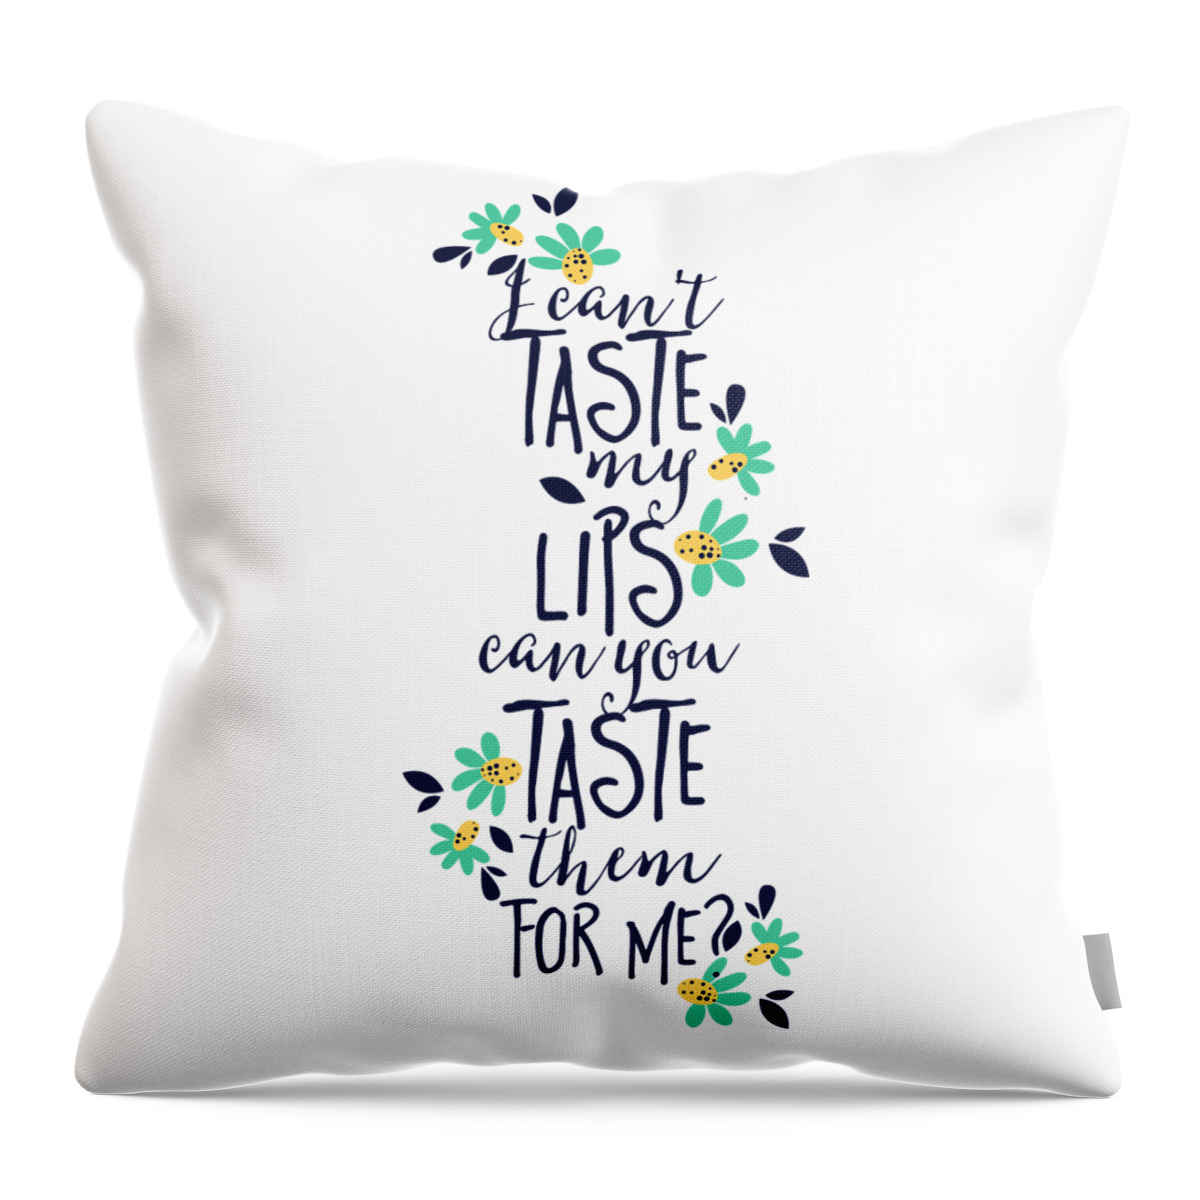 https://render.fineartamerica.com/images/rendered/default/throw-pillow/images/artworkimages/medium/3/i-cant-taste-my-lips-can-you-taste-them-for-me-jacob-zelazny-transparent.png?&targetx=148&targety=31&imagewidth=183&imageheight=417&modelwidth=479&modelheight=479&backgroundcolor=ffffff&orientation=0&producttype=throwpillow-14-14